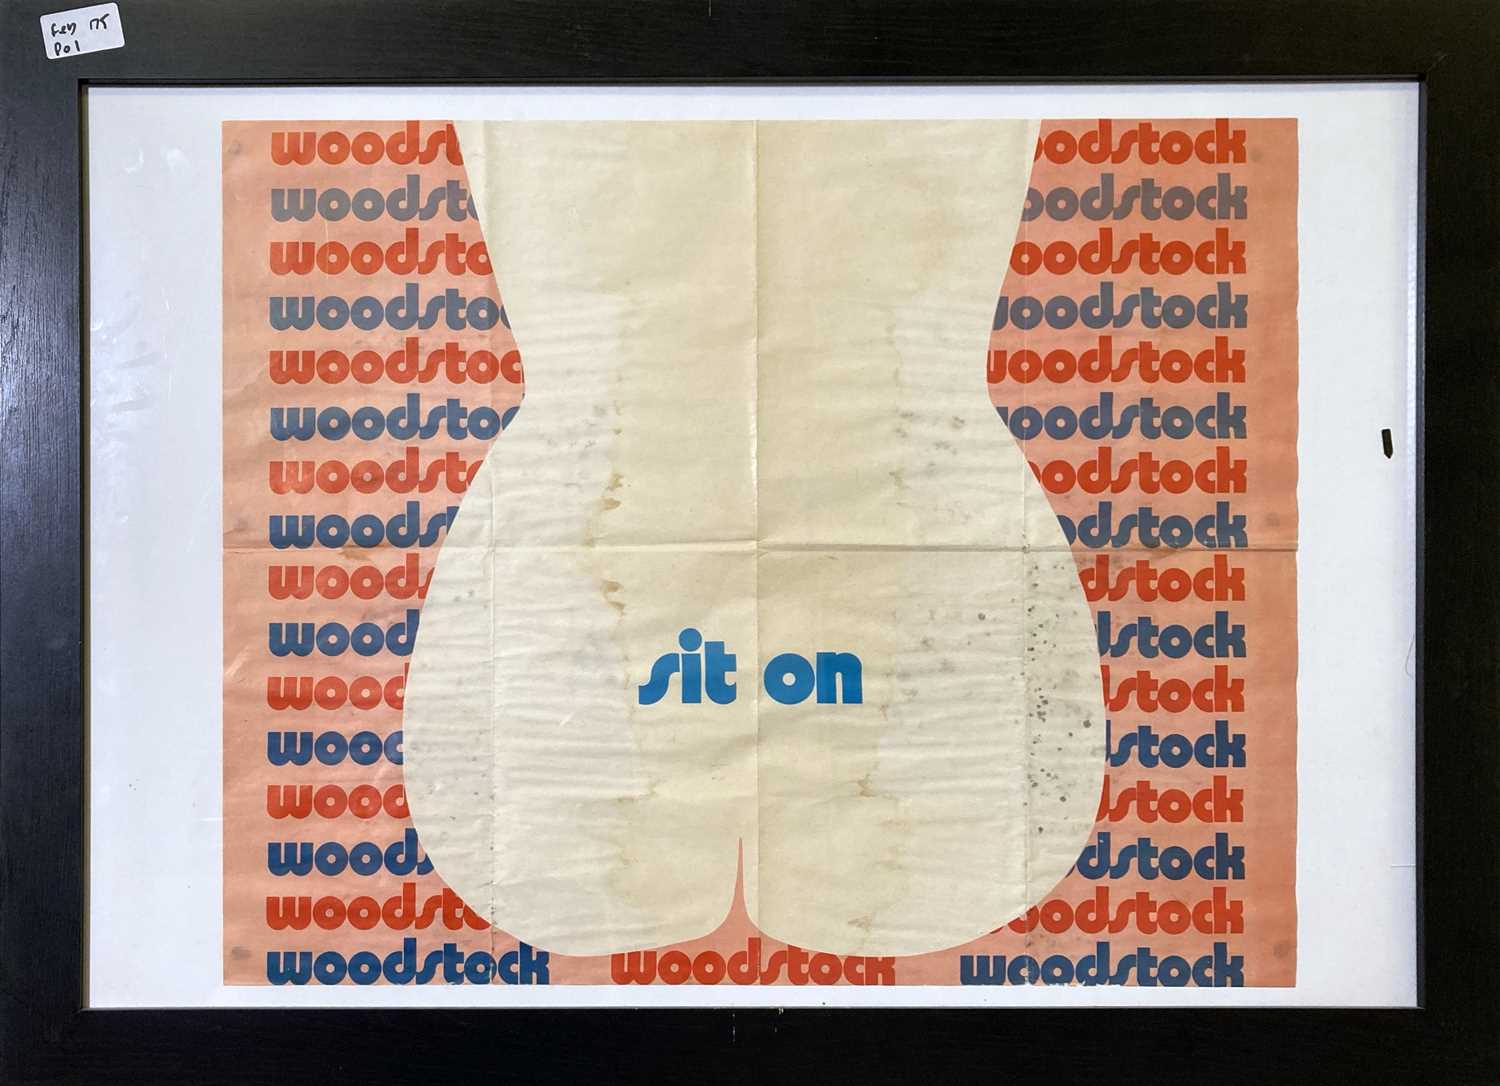 Lot 81 - WOODSTOCK - SIT ON 1970 ADVERTISING POSTER.